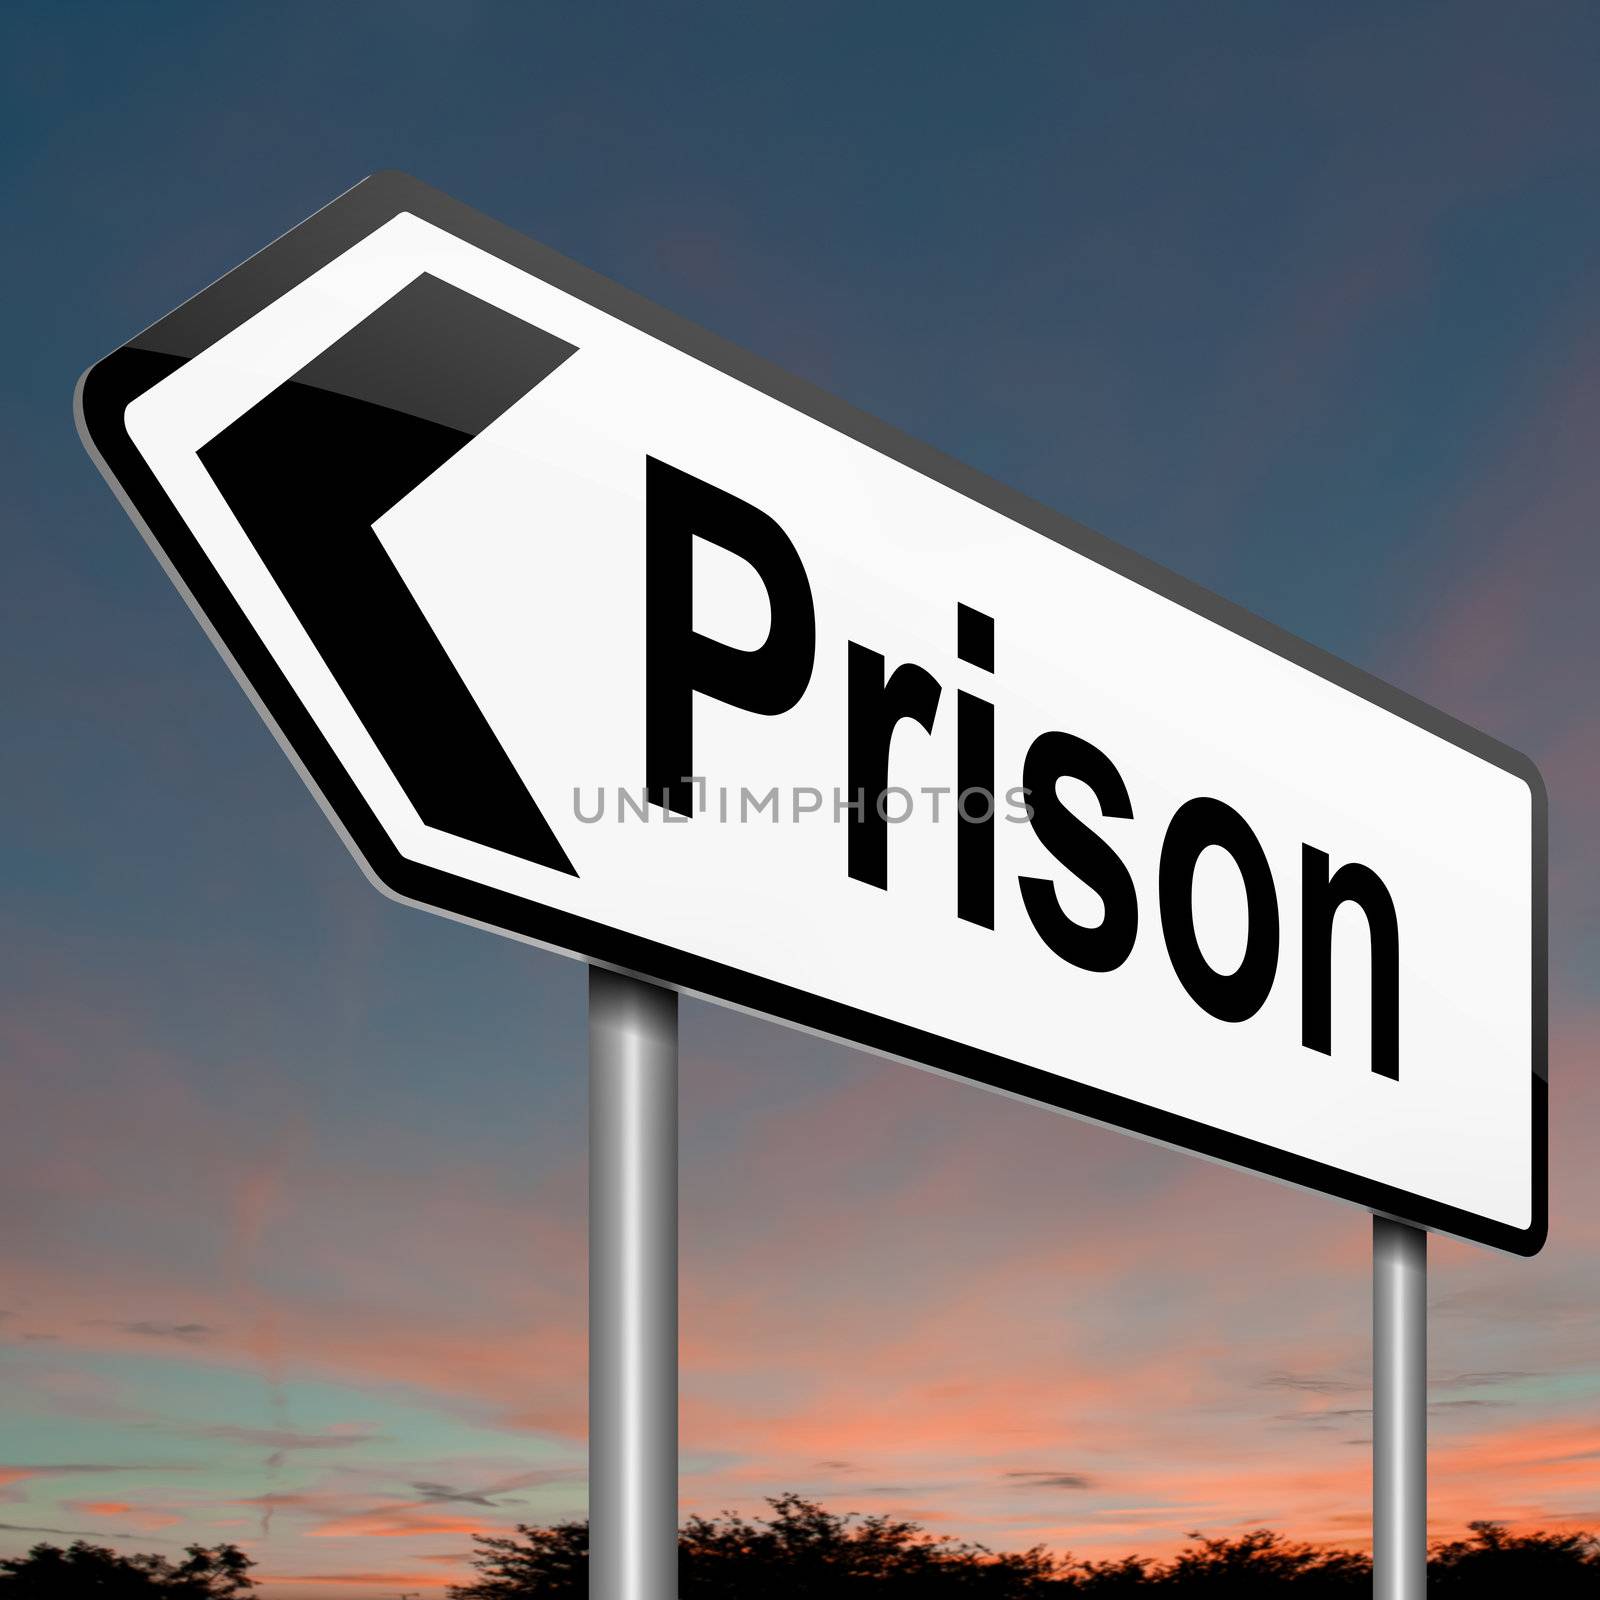 Illustration depicting a sign with a jail concept.